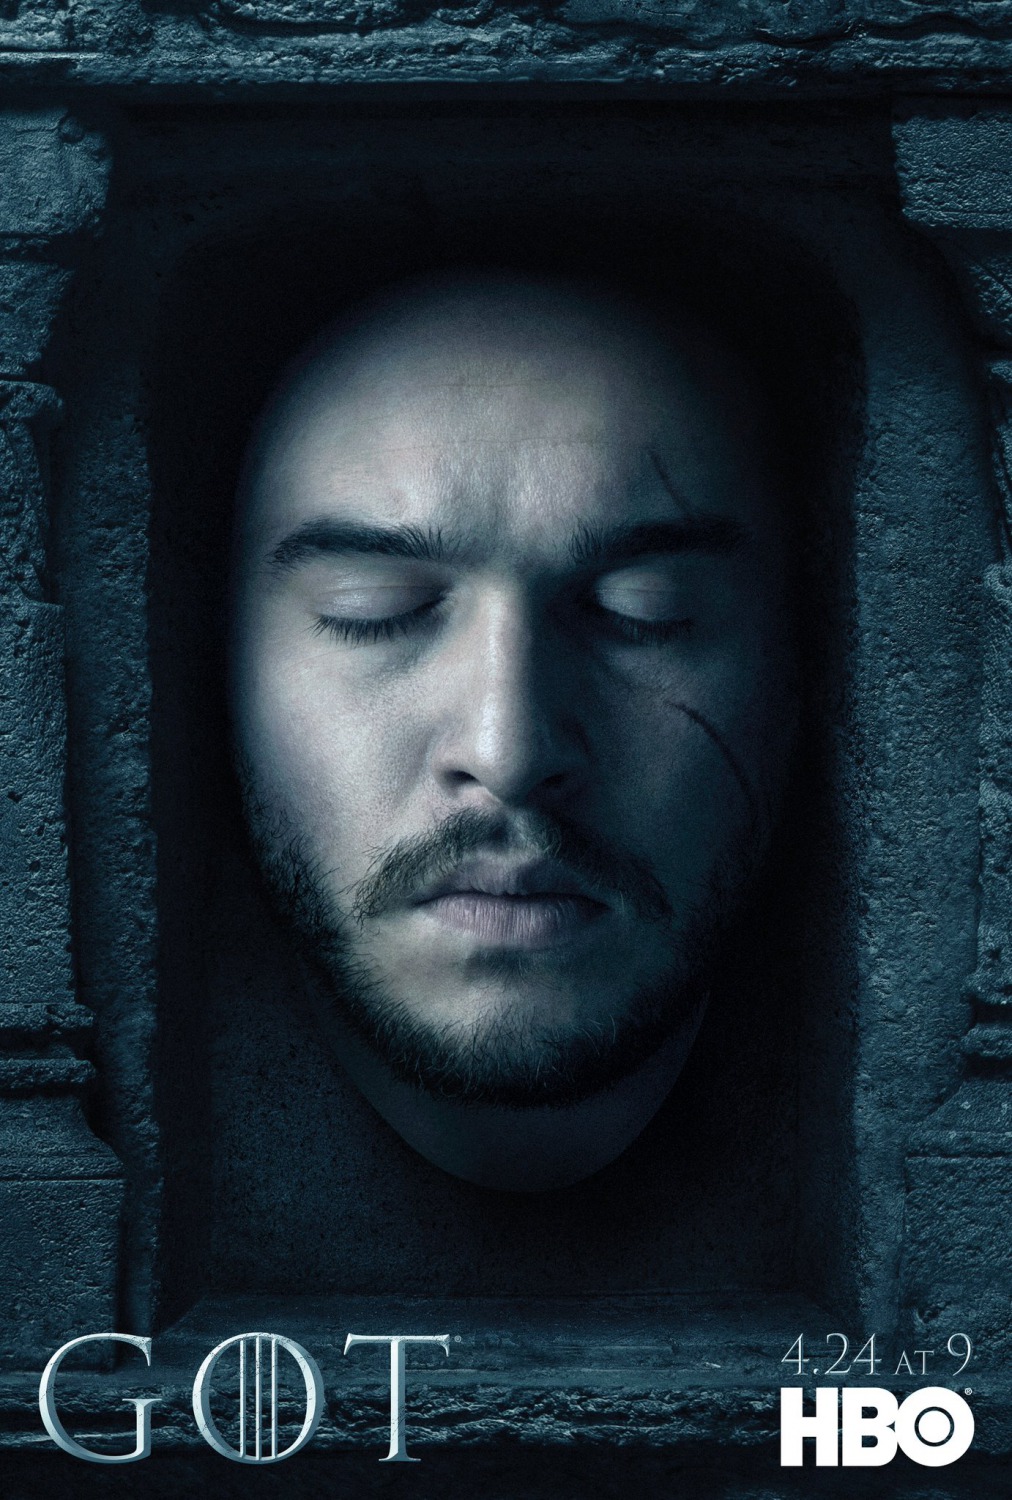 Extra Large TV Poster Image for Game of Thrones (#66 of 125)